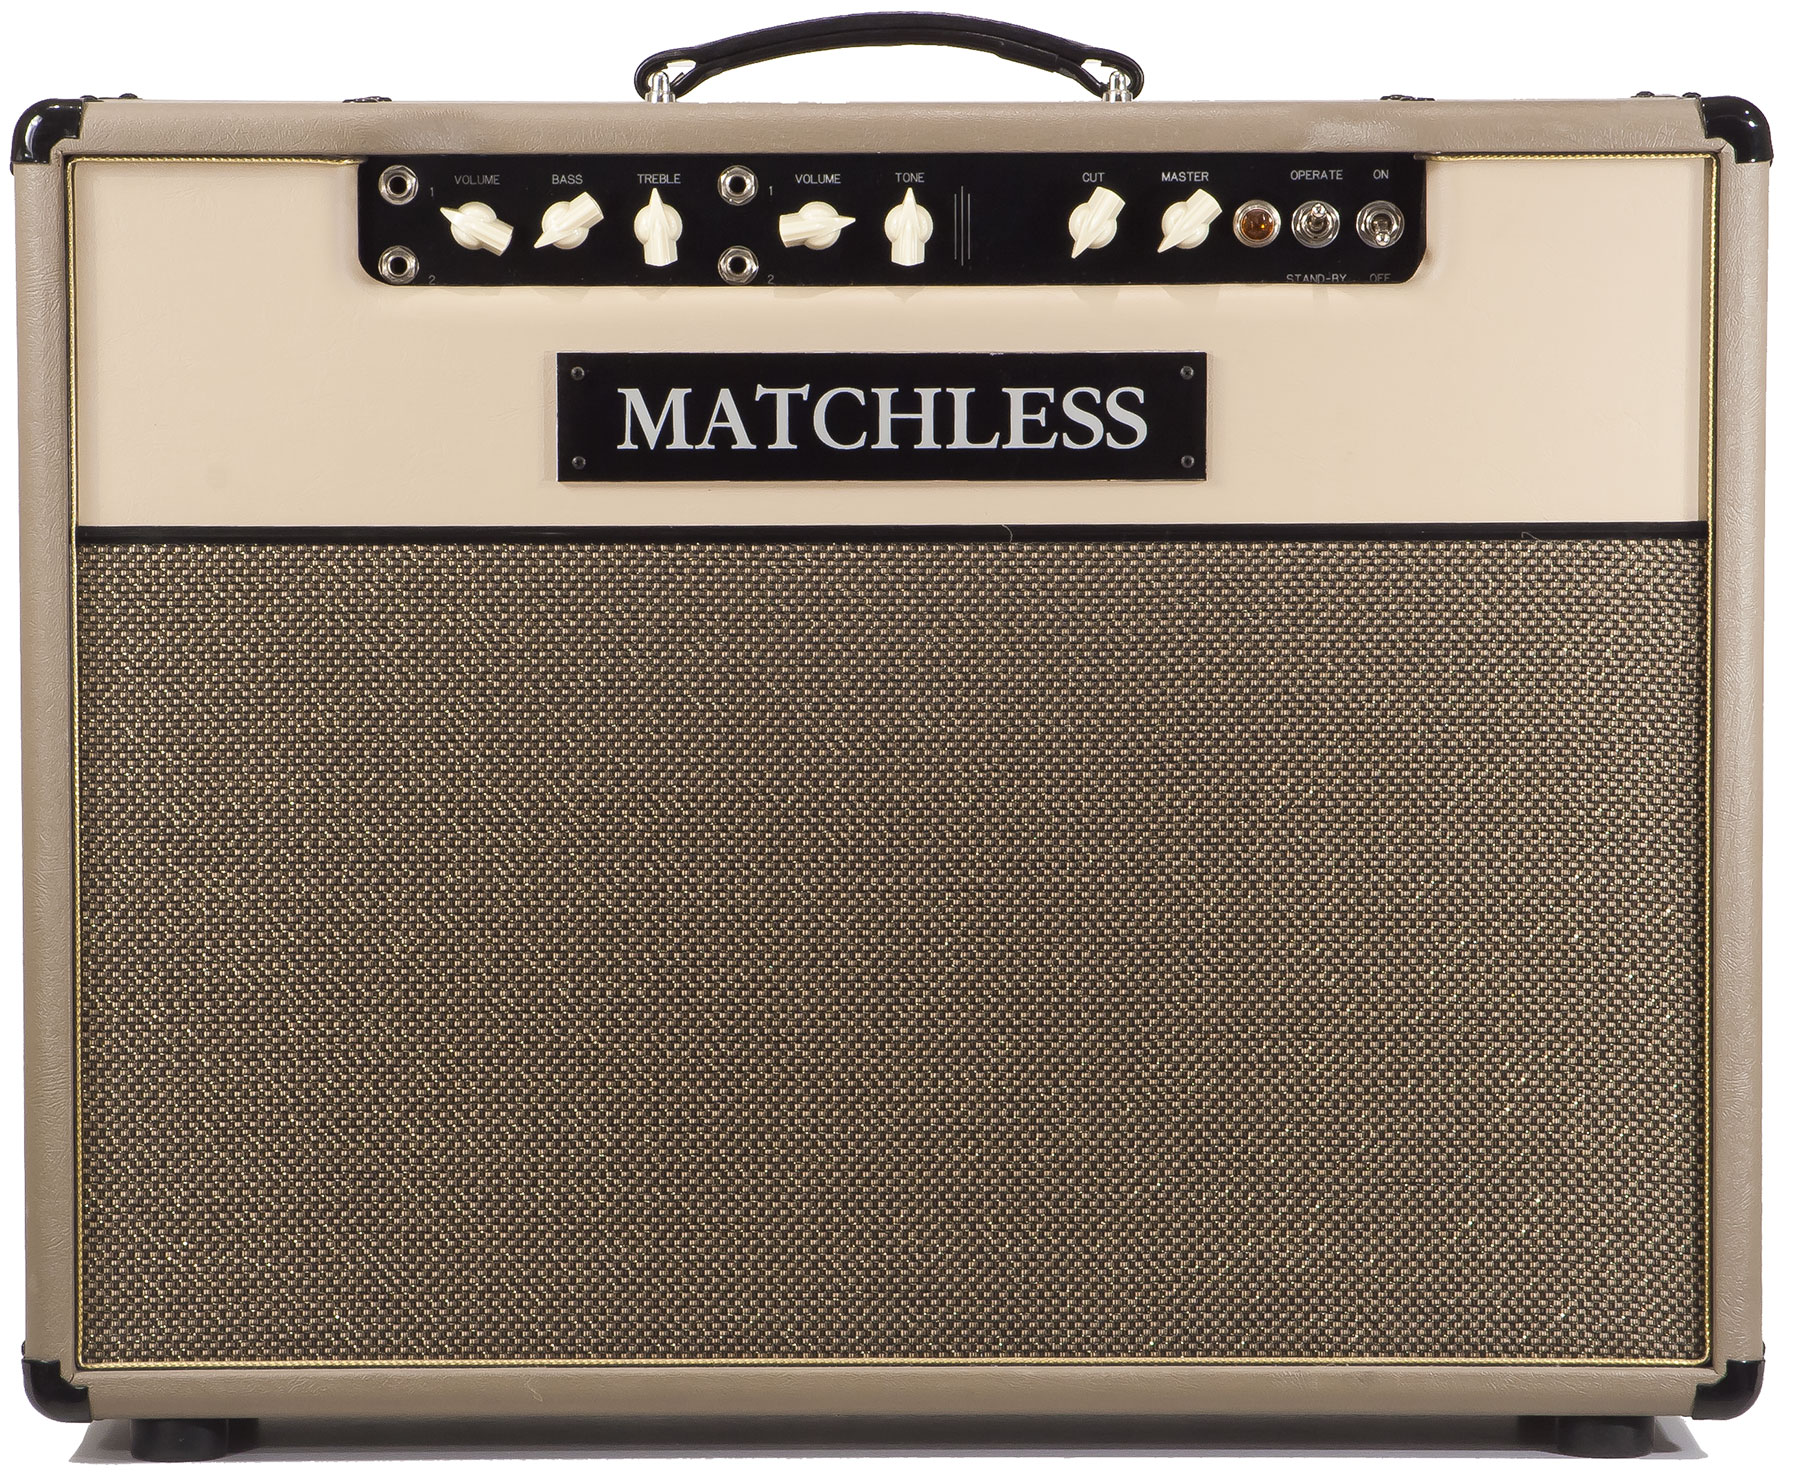 Matchless Dc-30 30w 2x12 Cappuccino/gold - Combo für E-Gitarre - Variation 4